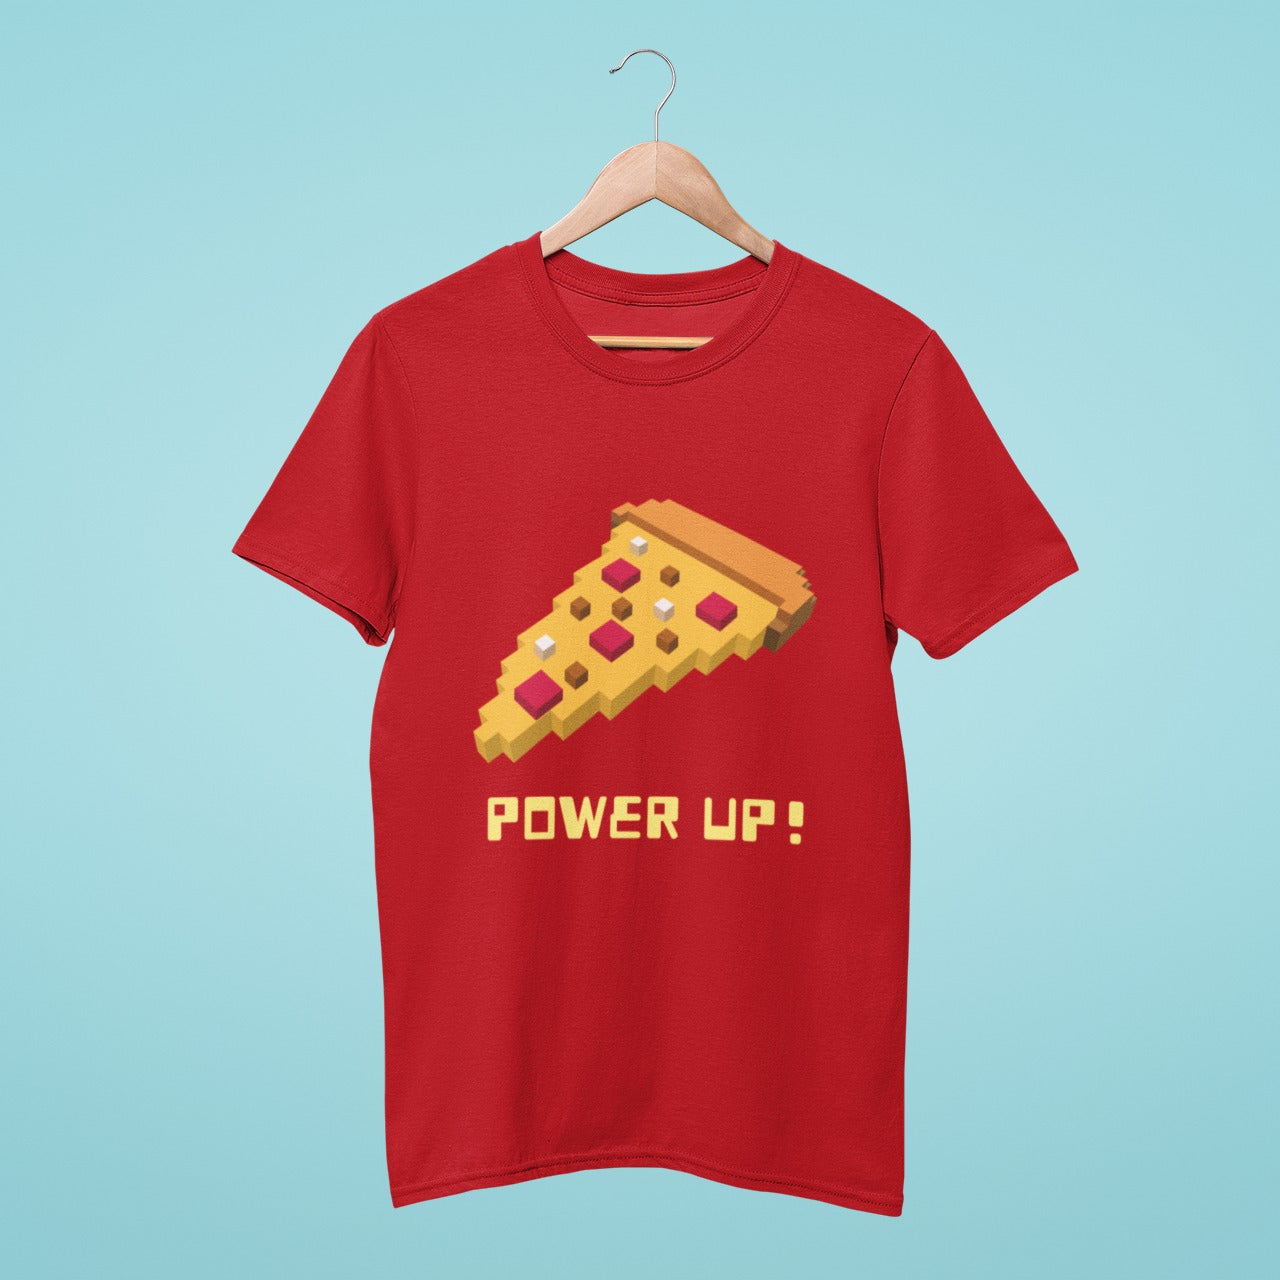 Level up your style with this red t-shirt featuring a delicious twist! The 'Power Up!' title and Minecraft-style pizza slice graphic make it perfect for gamers and foodies alike.